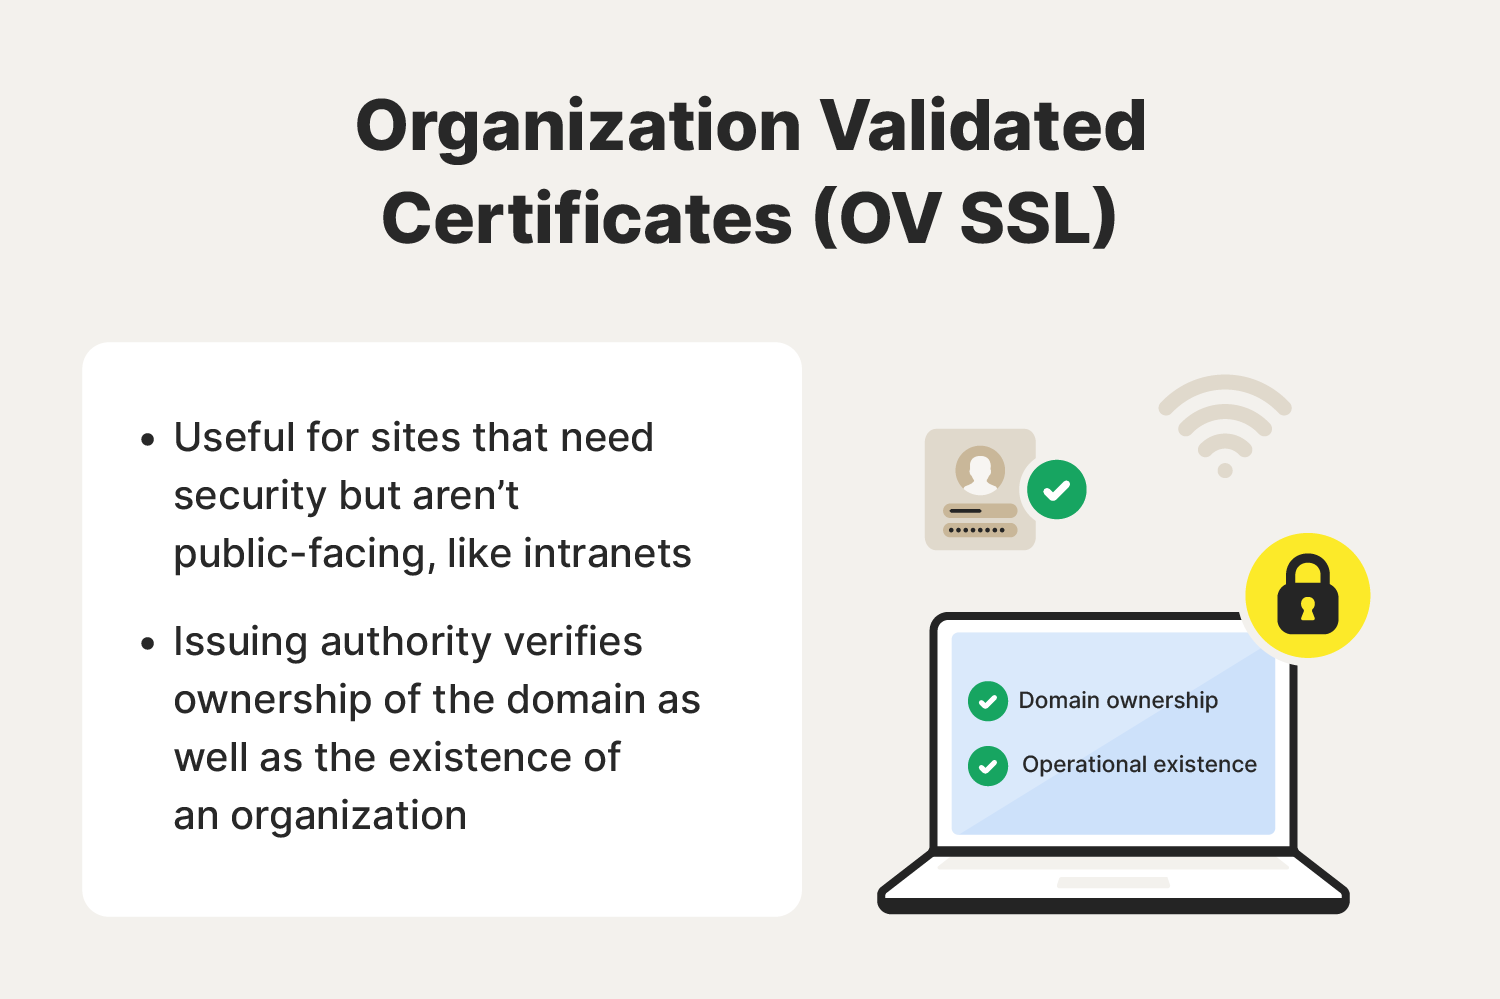 Illustrated chart covering what an Organization Validated Certificate (OV SSL) is.